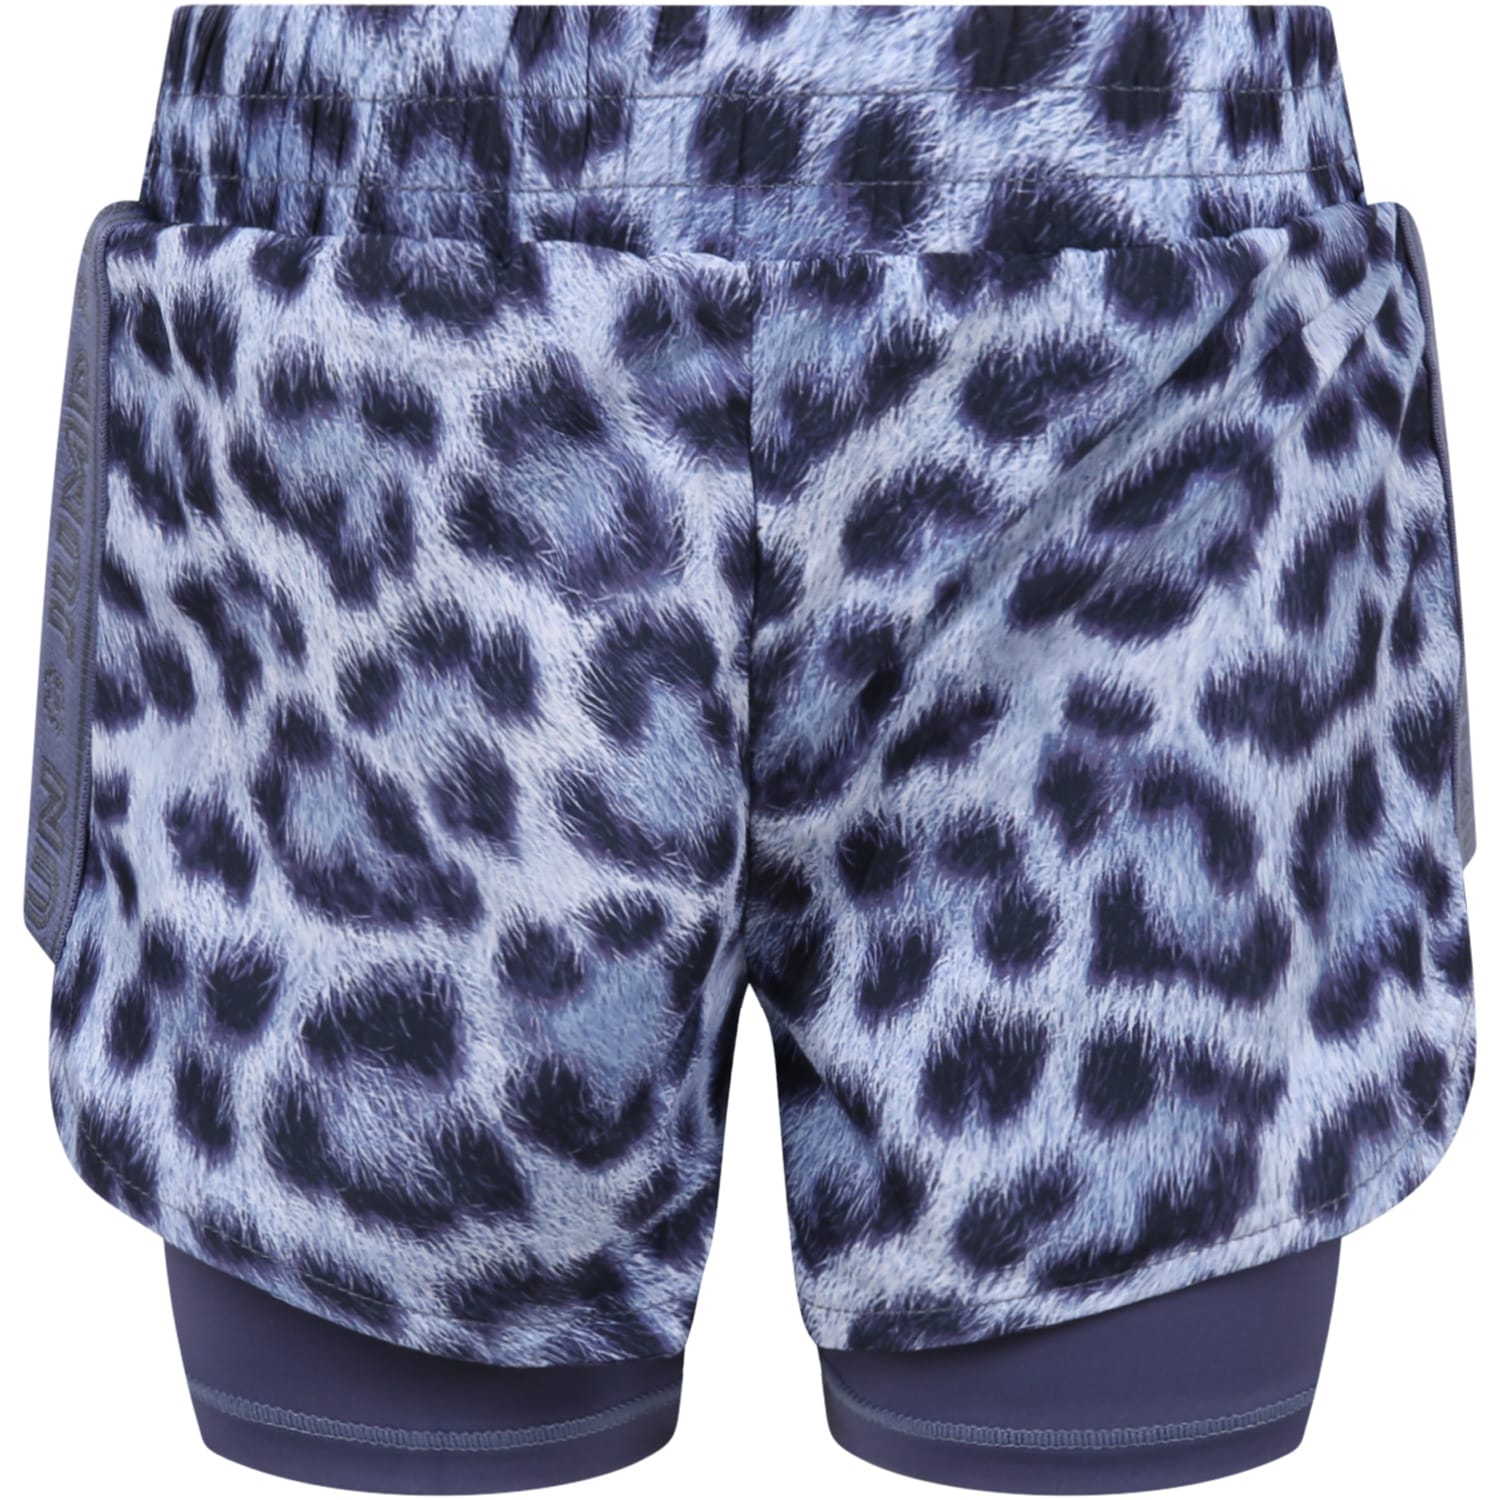 Molo Multicolor Shorts For Girl With Animalier Print